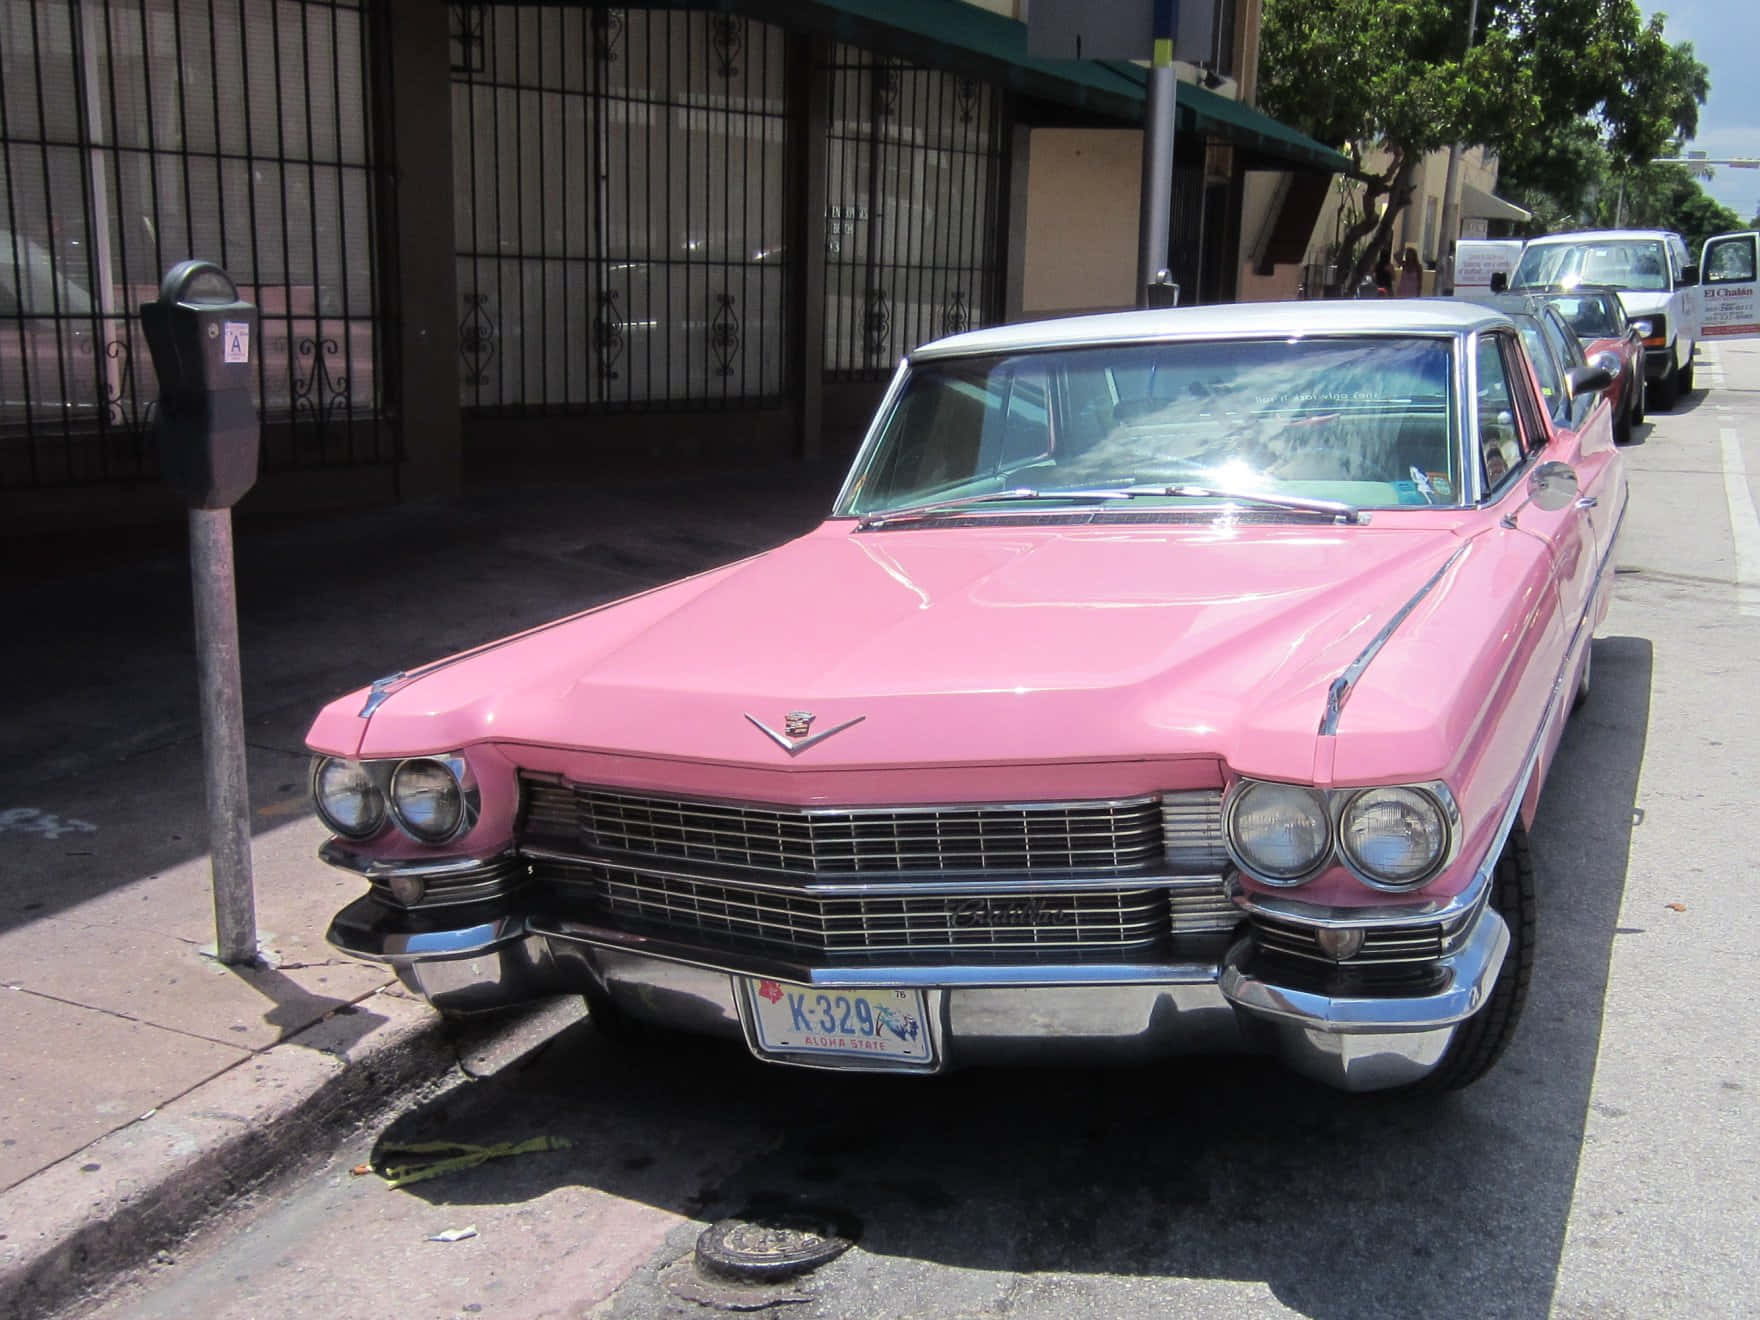 Vintage Pink Cadillac under a Clear Sky Wallpaper